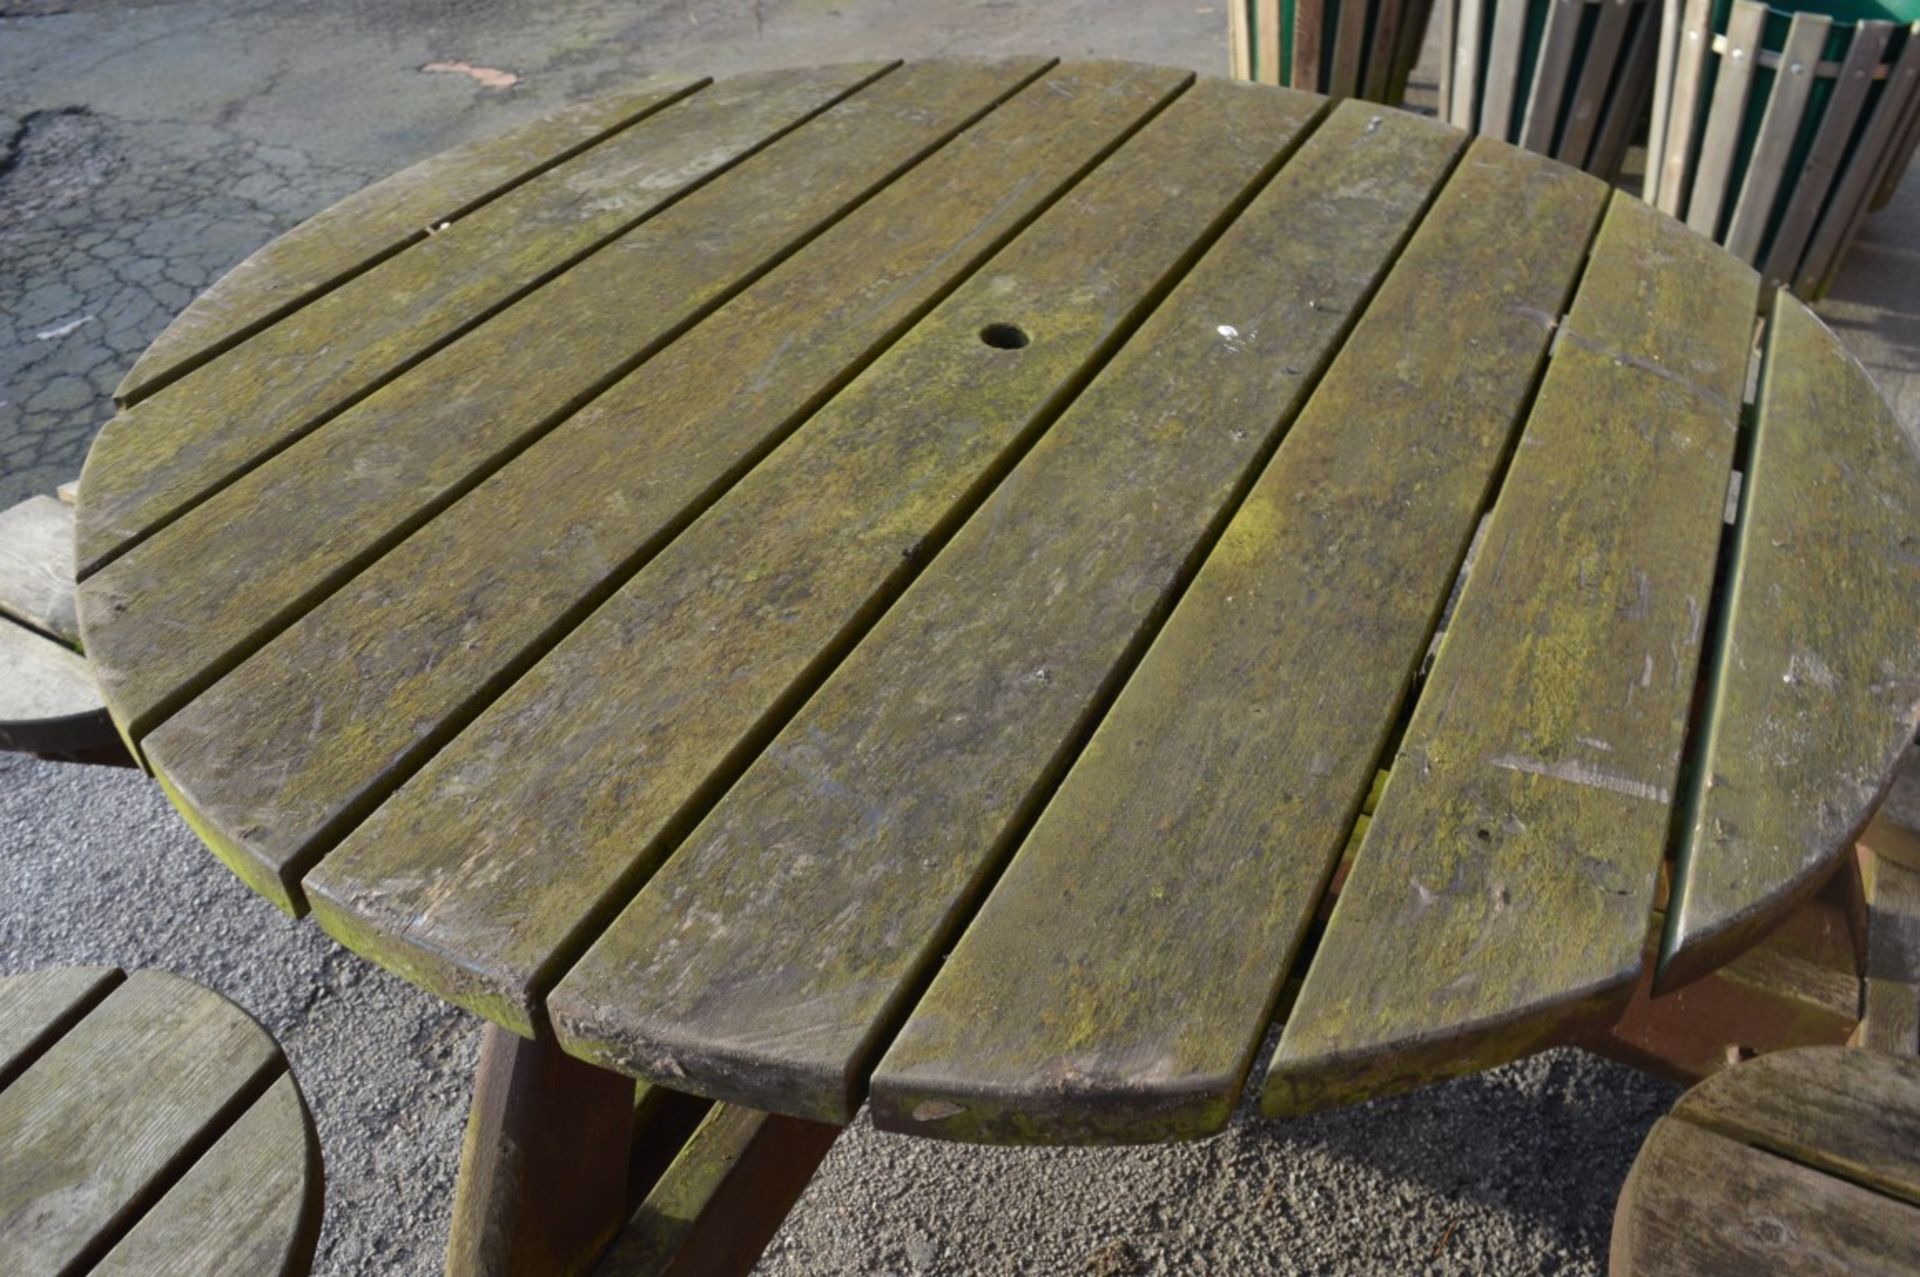 1 x Outdoor Picnic Pub Bench - Designed For 8 People To Be Sat Around a Circular Table - Ideal For - Image 4 of 4